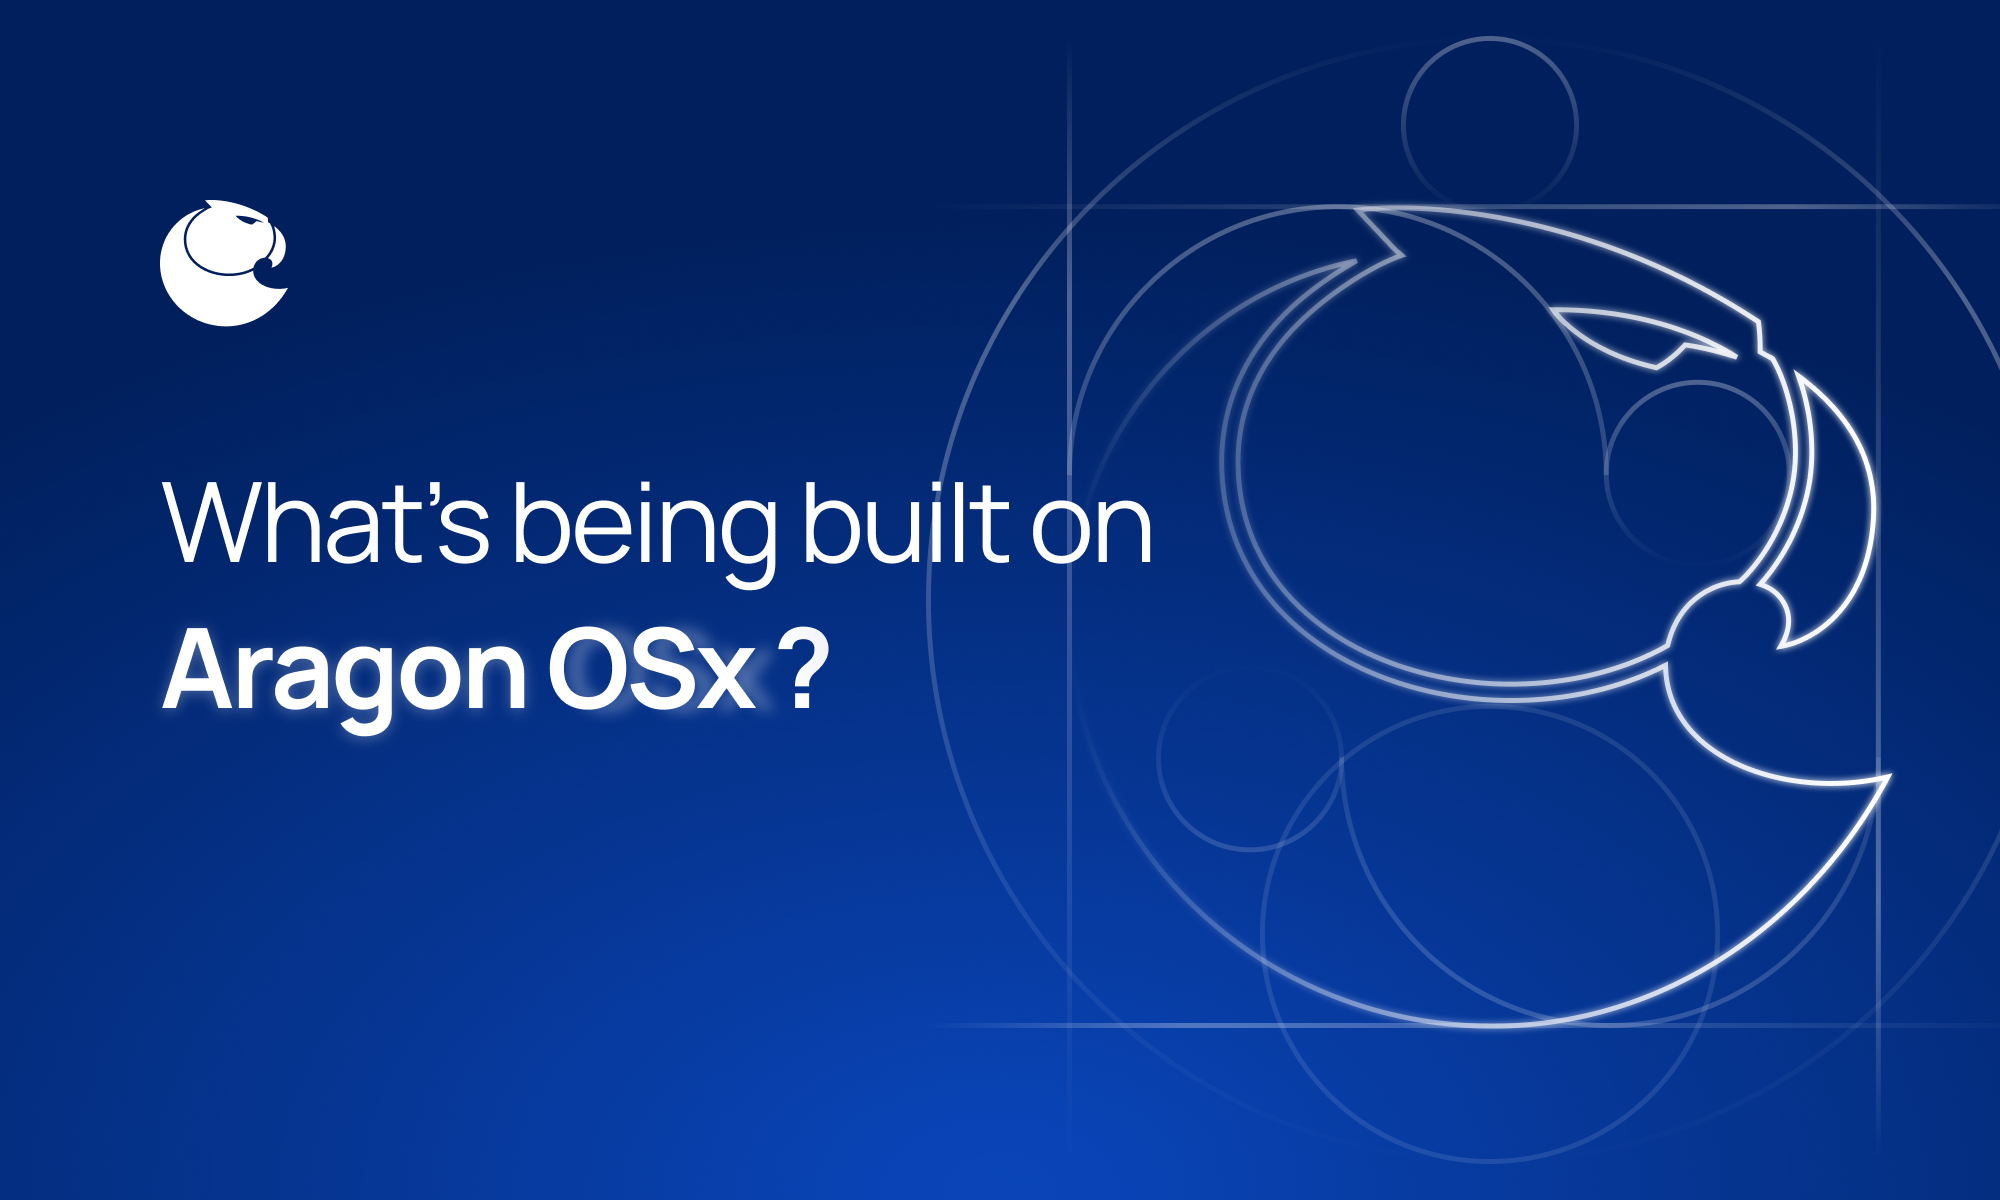 What's being built on Aragon OSx?